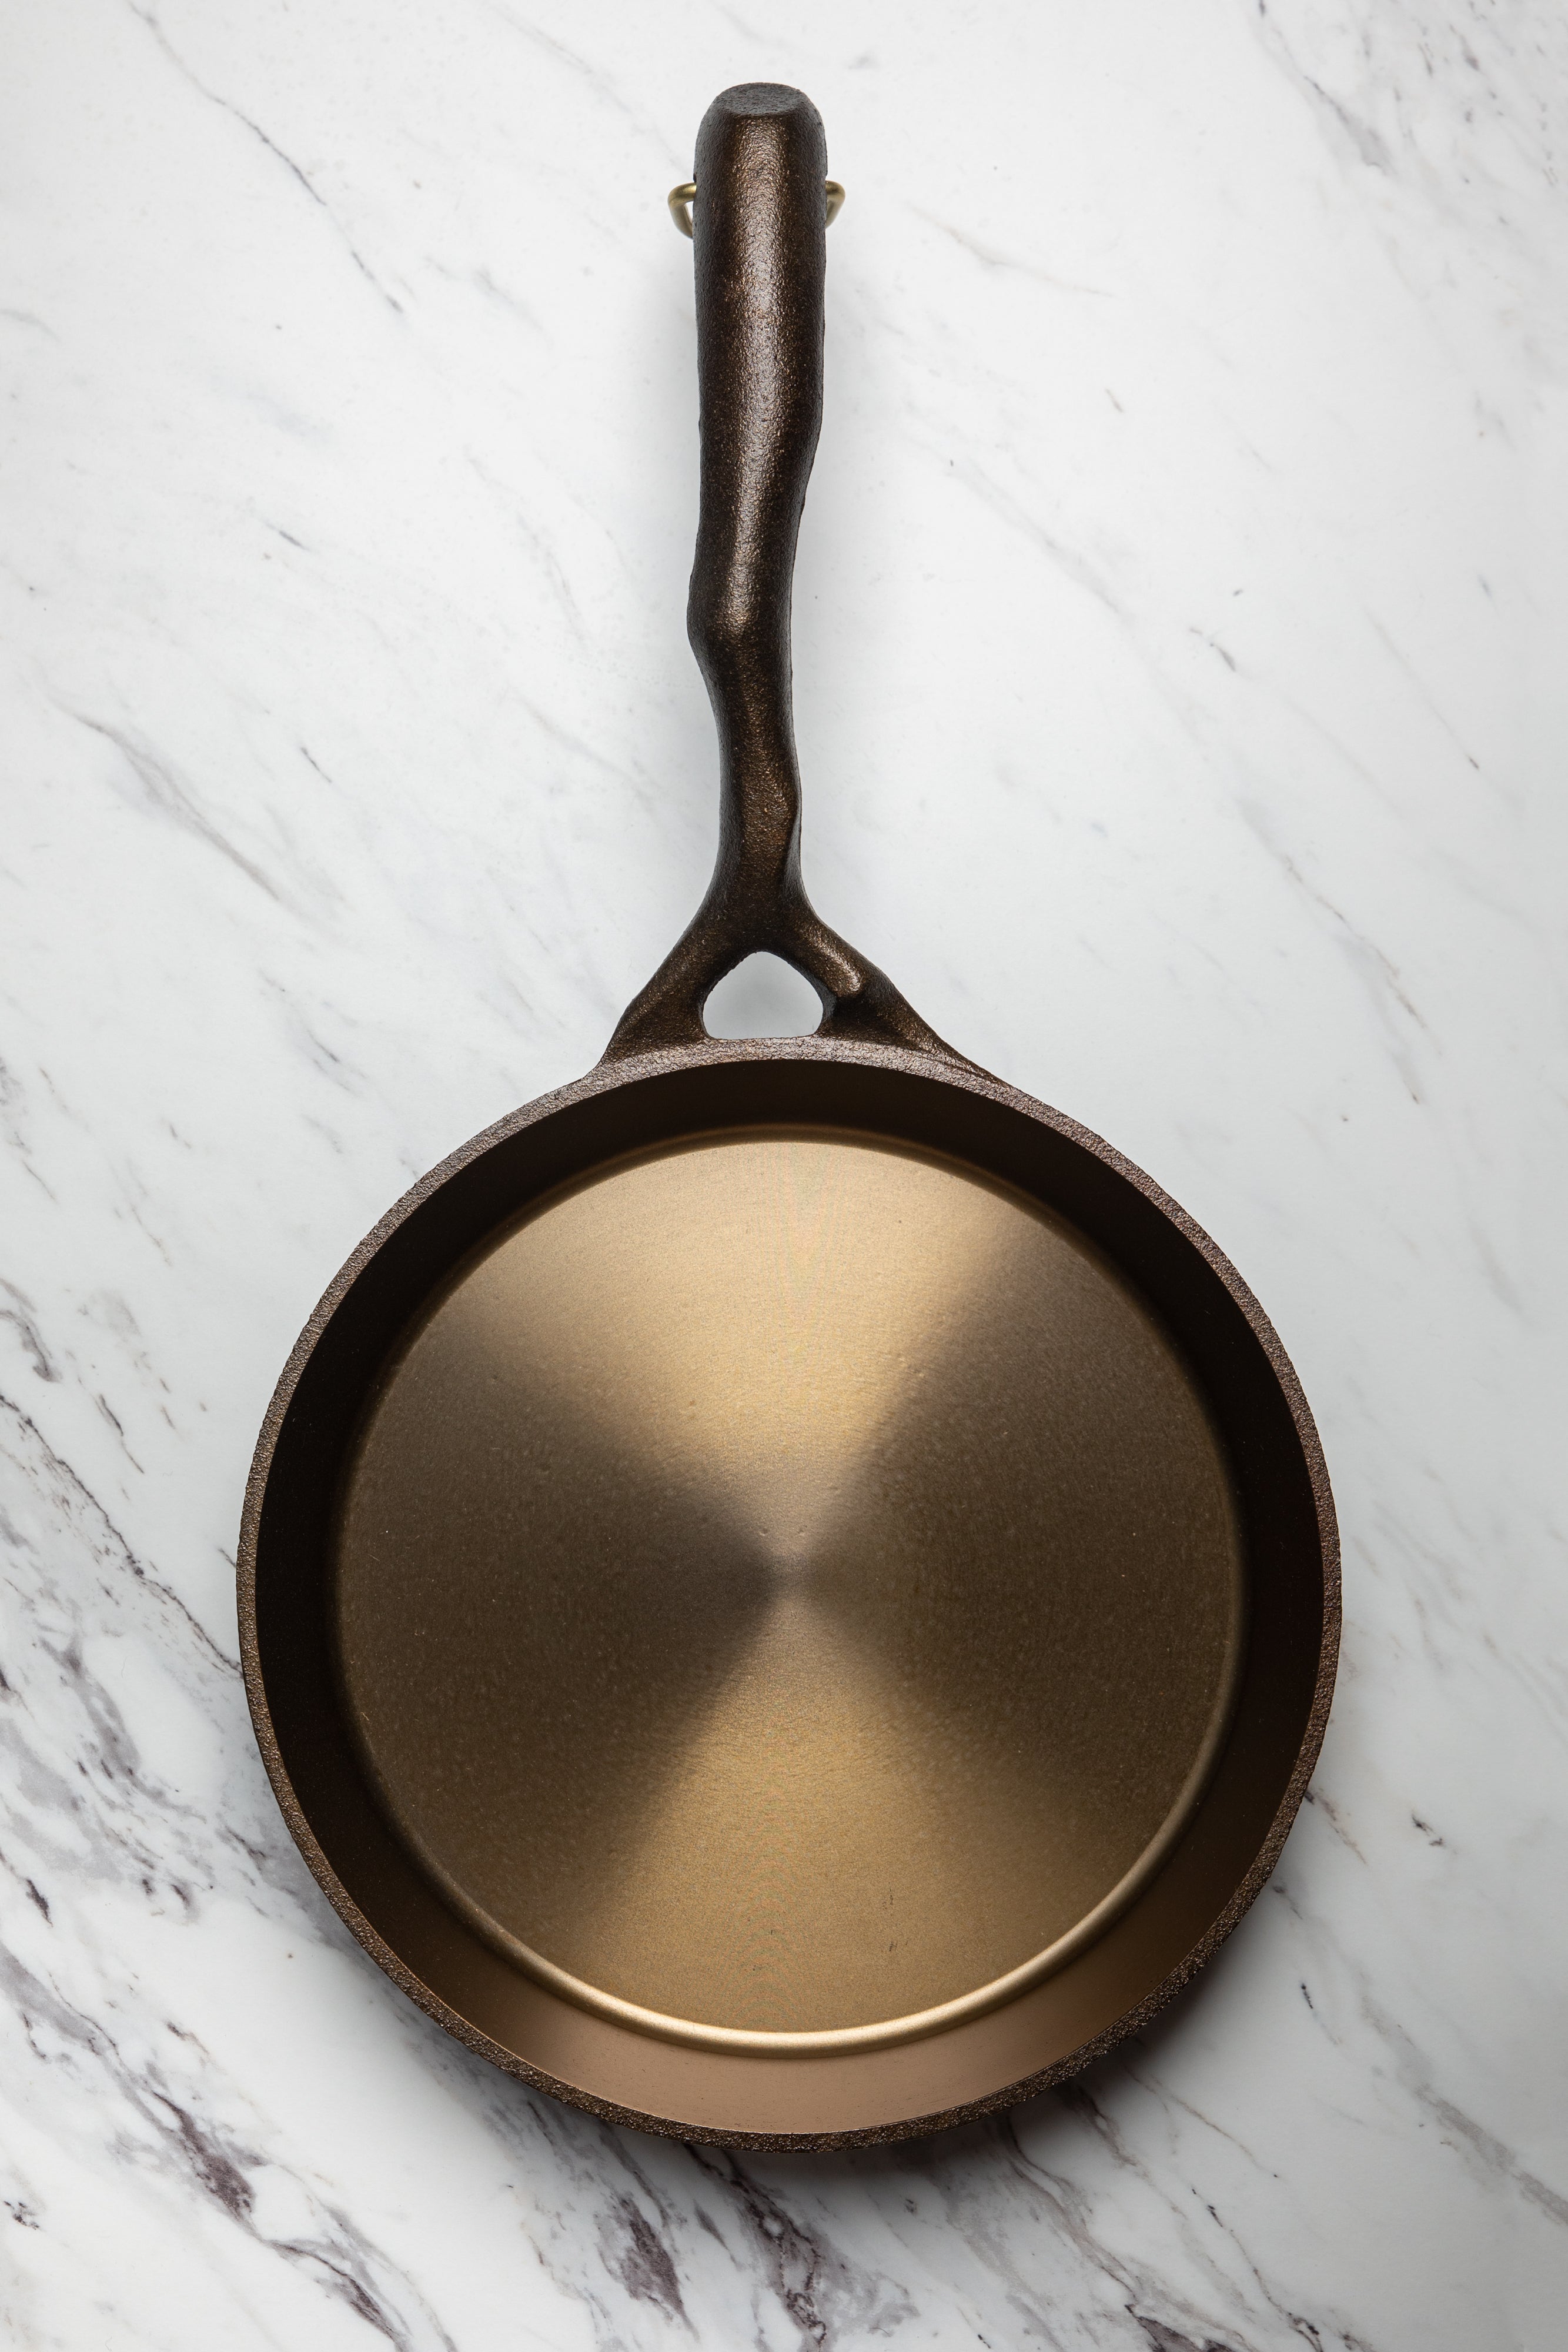 This Lodge Cast Iron Skillet Is the Most Versatile Pan in My Kitchen